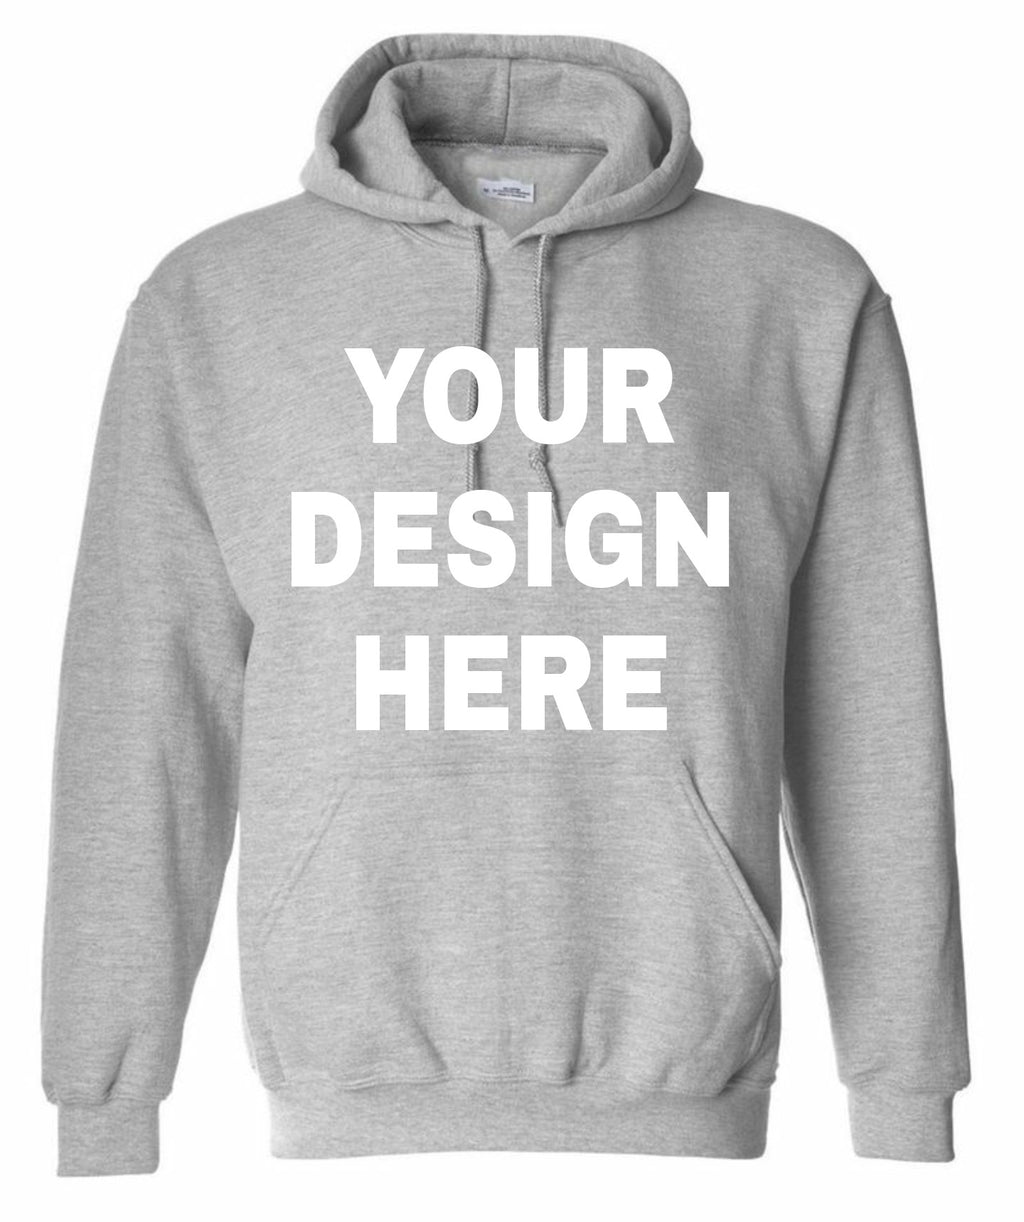 Design your OWN Hoodie